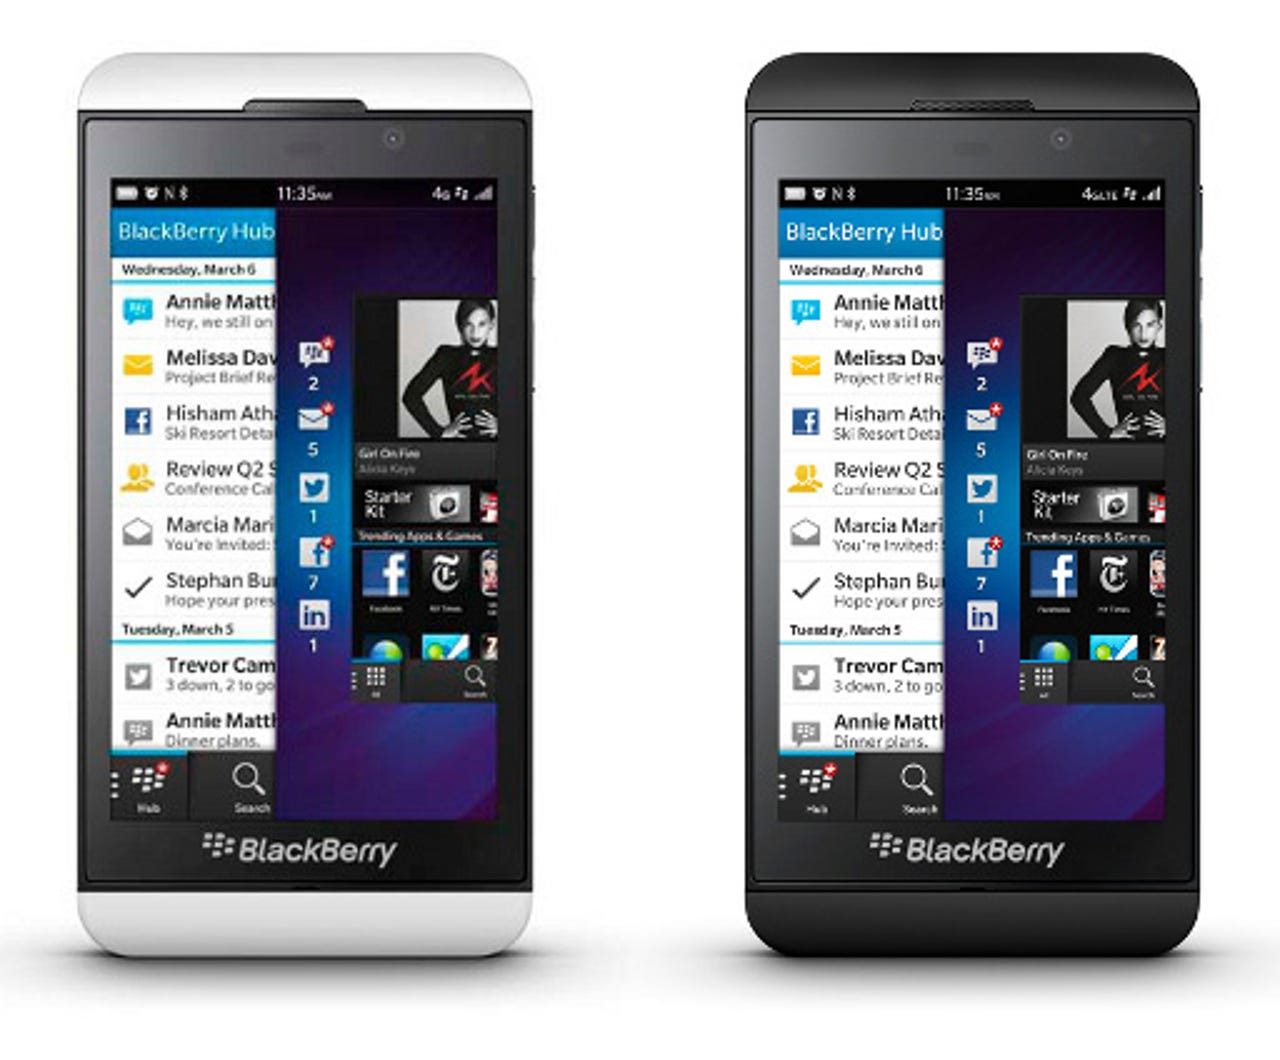 BlackBerry 10 and the Z10: 10 things I like and 5 things I don't